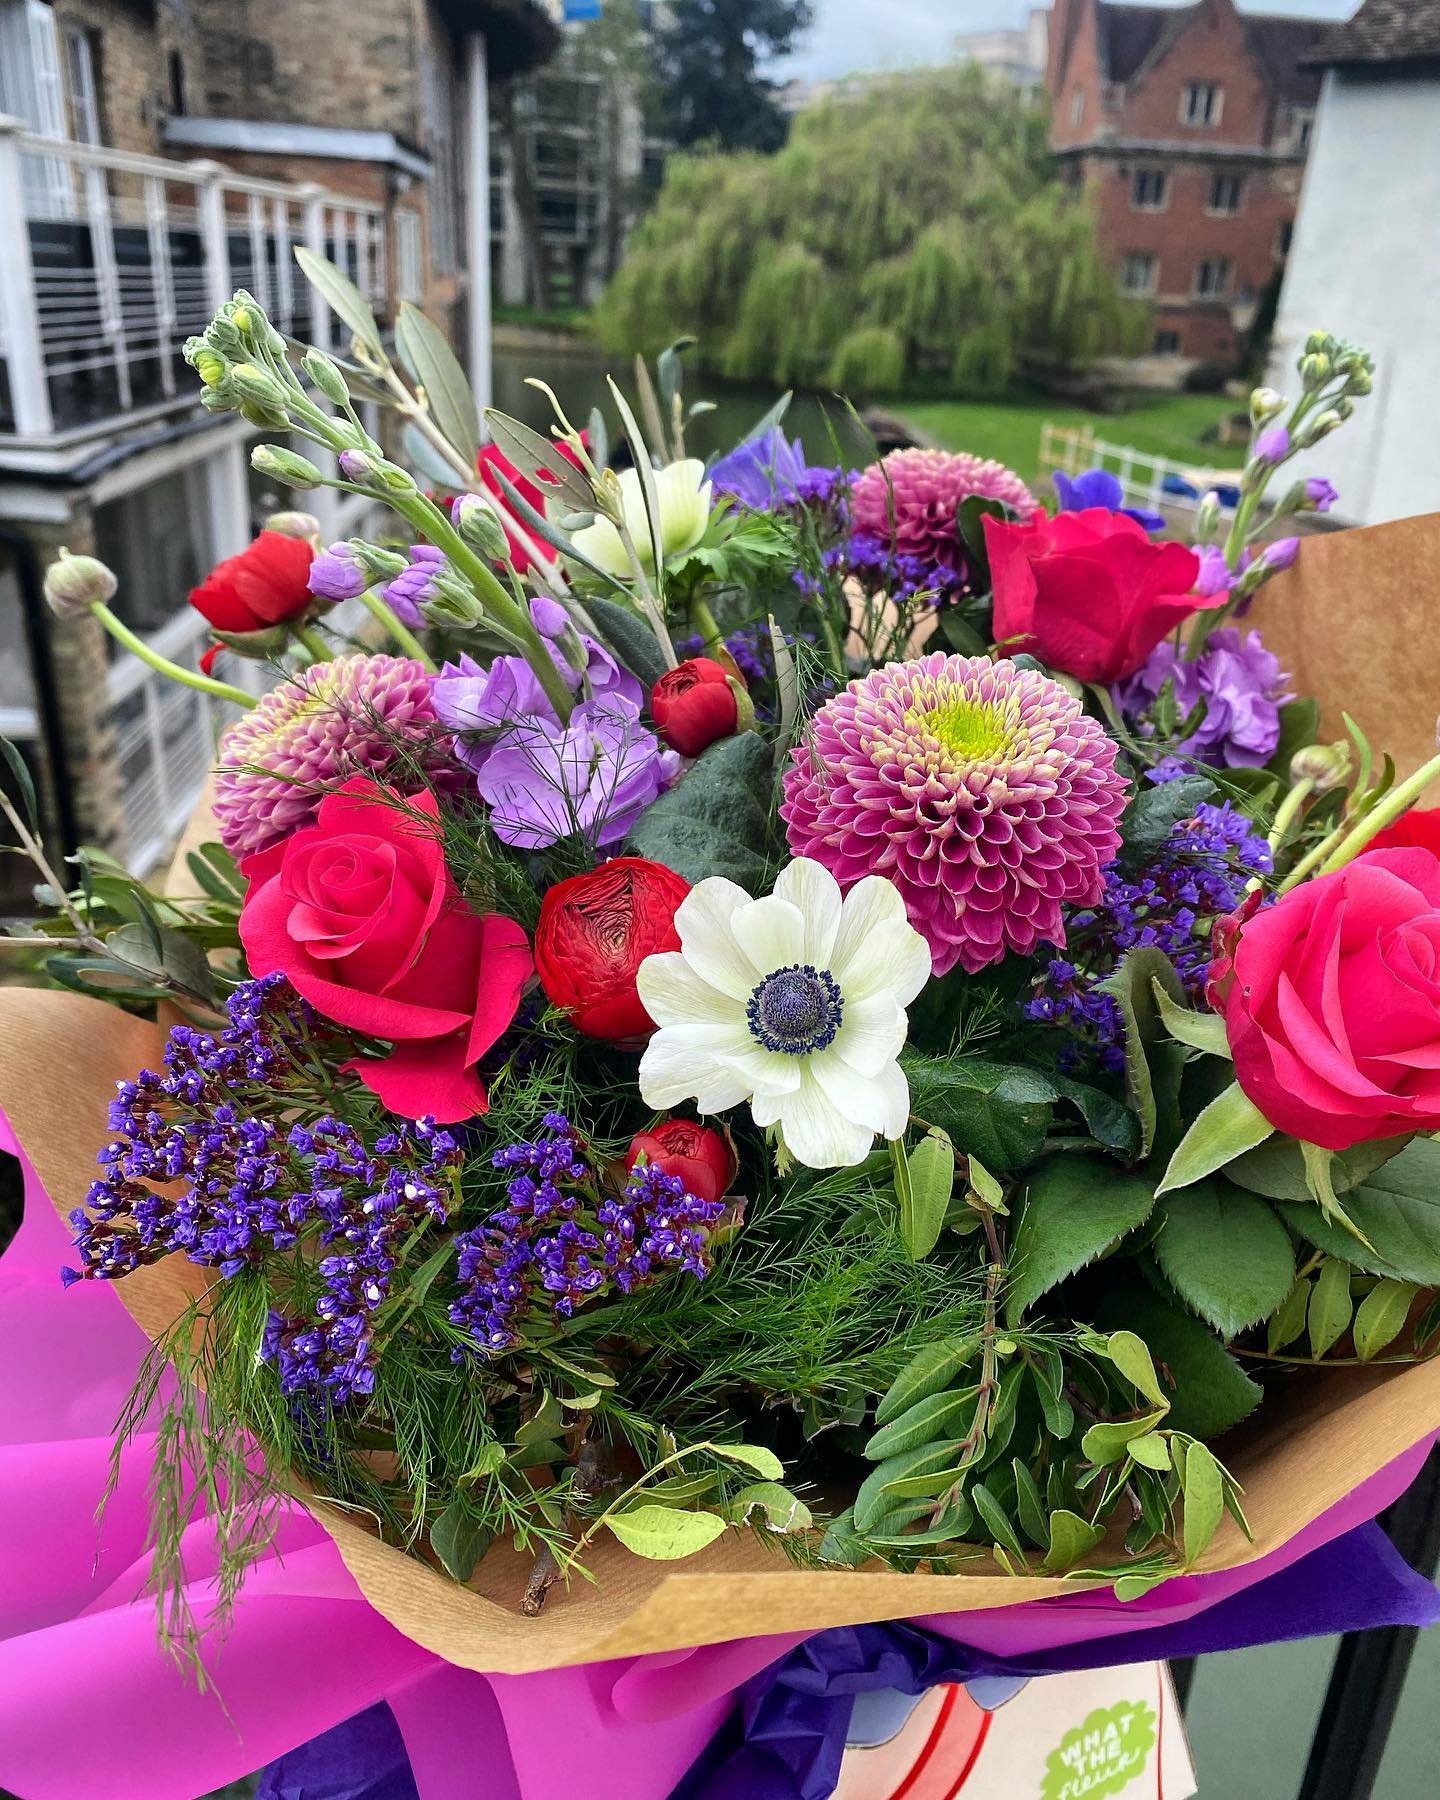 Anemones (say it like Nemo) make everything better! ❤️
Stocks and ranunculus too. 🥰
Spring flowers are the flava of the moment - so get &lsquo;em whilst they&rsquo;re hot! 🔥 
(And before they go out of season!) 🛼
Little trotsky delivery over the b